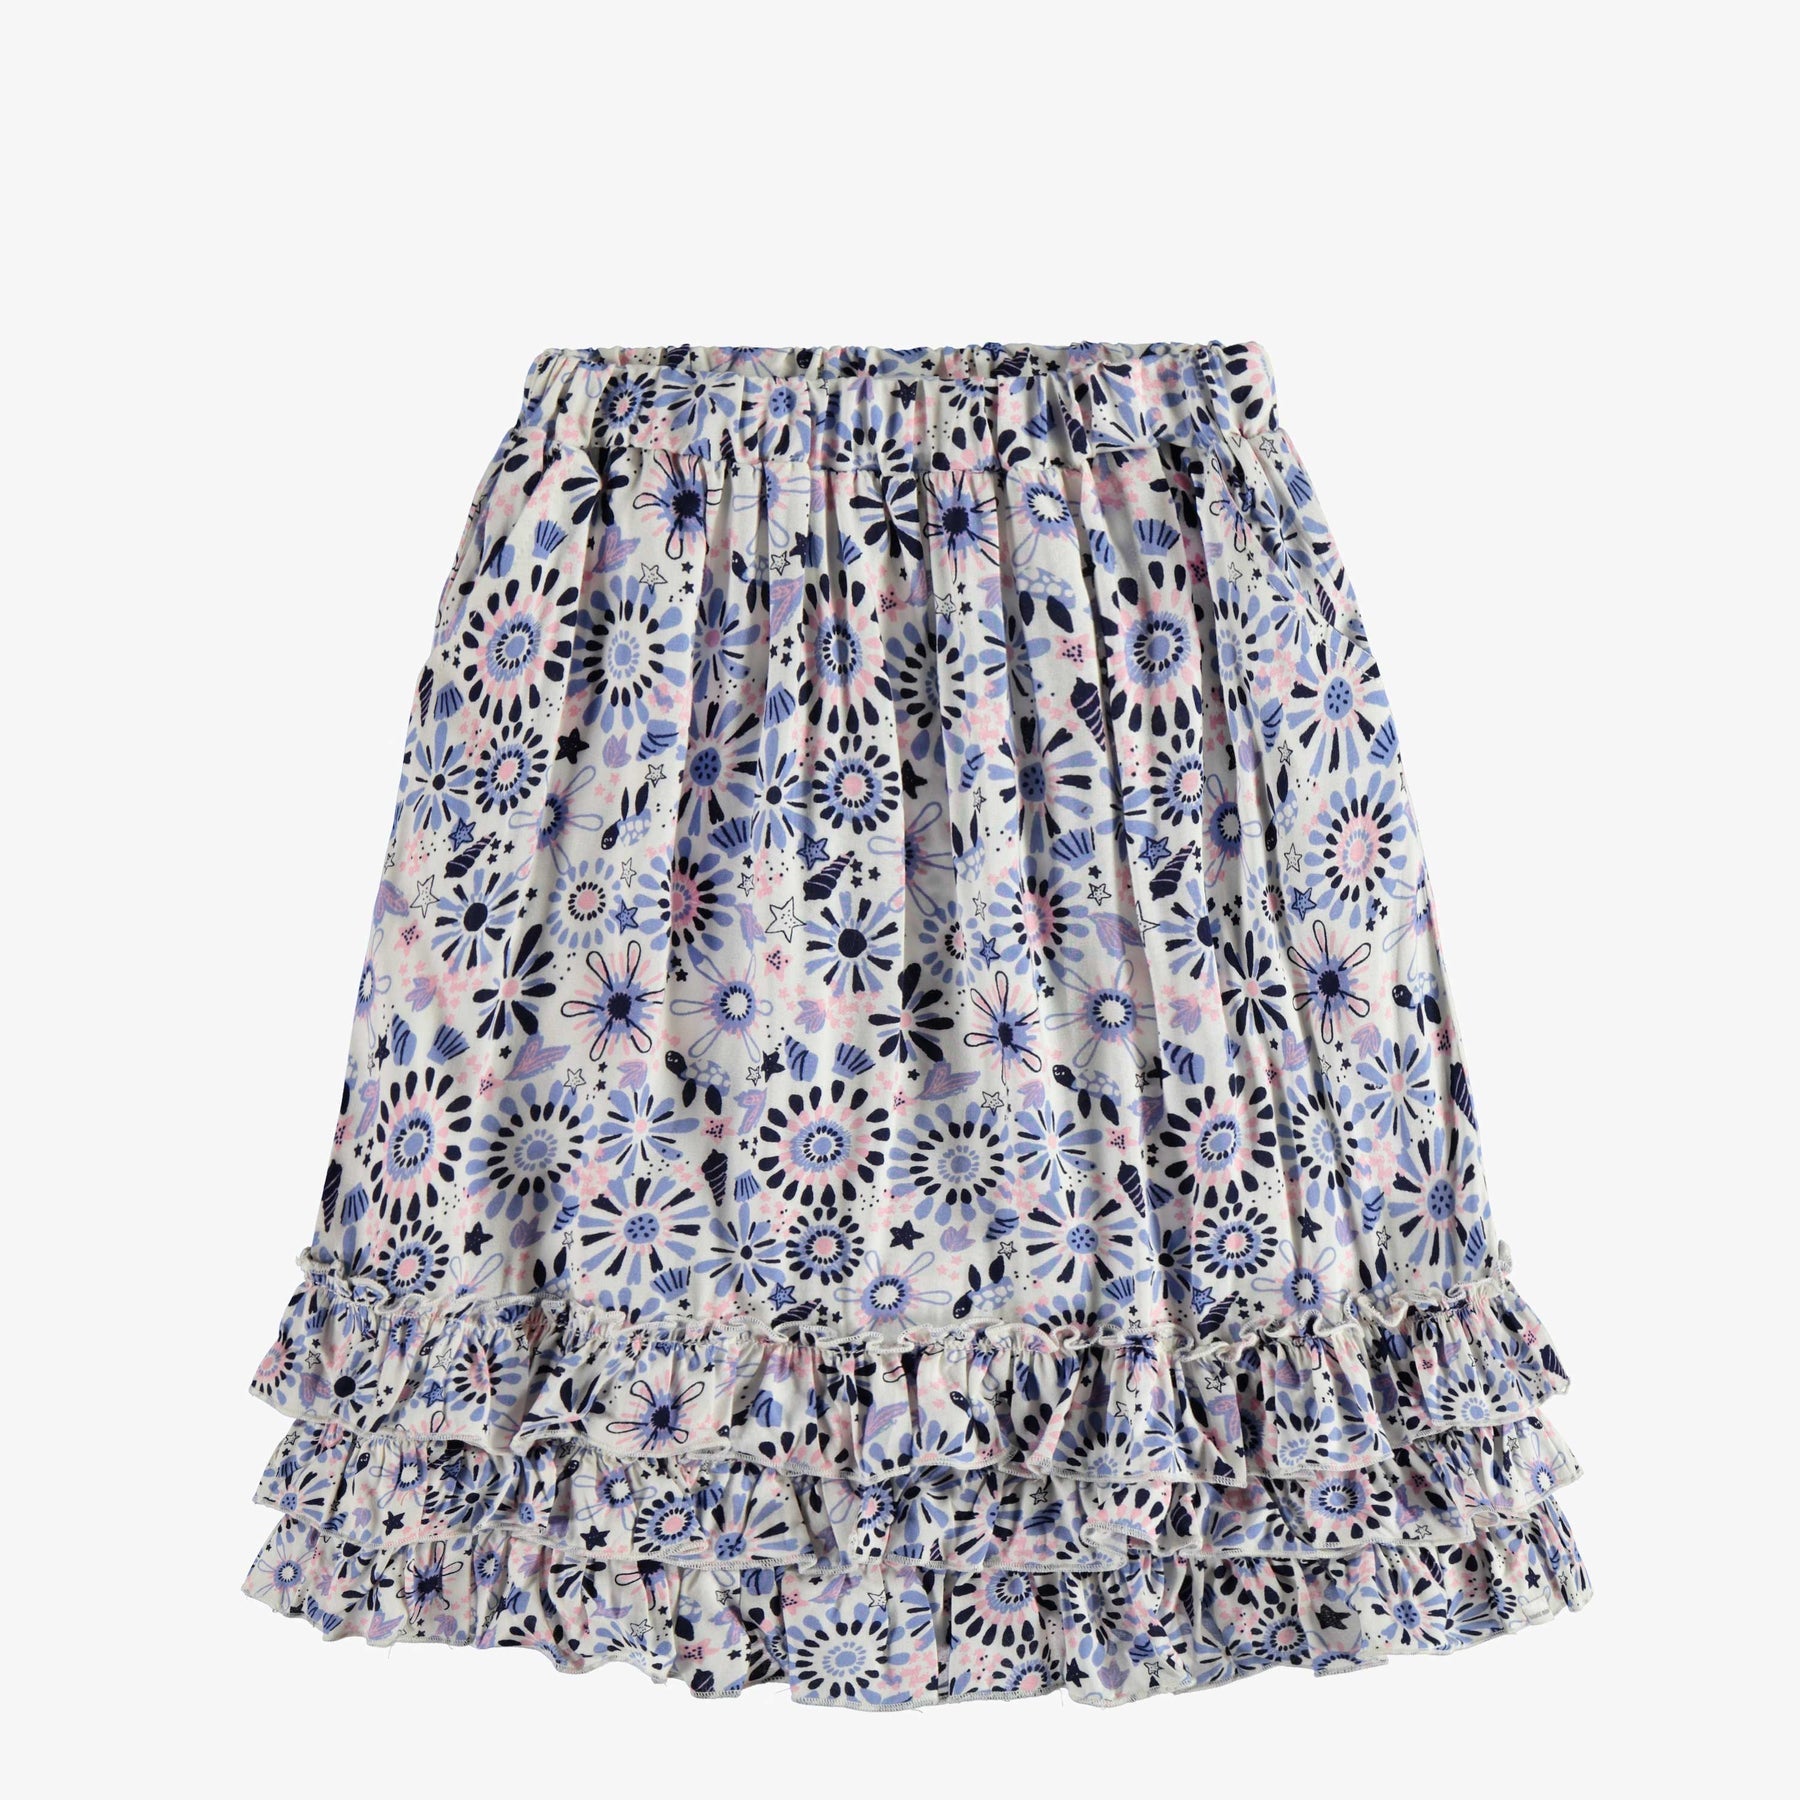 LONG WHITE SKIRT WITH RUFFLES AND A FLORAL PRINT VISCOSE, CHILD